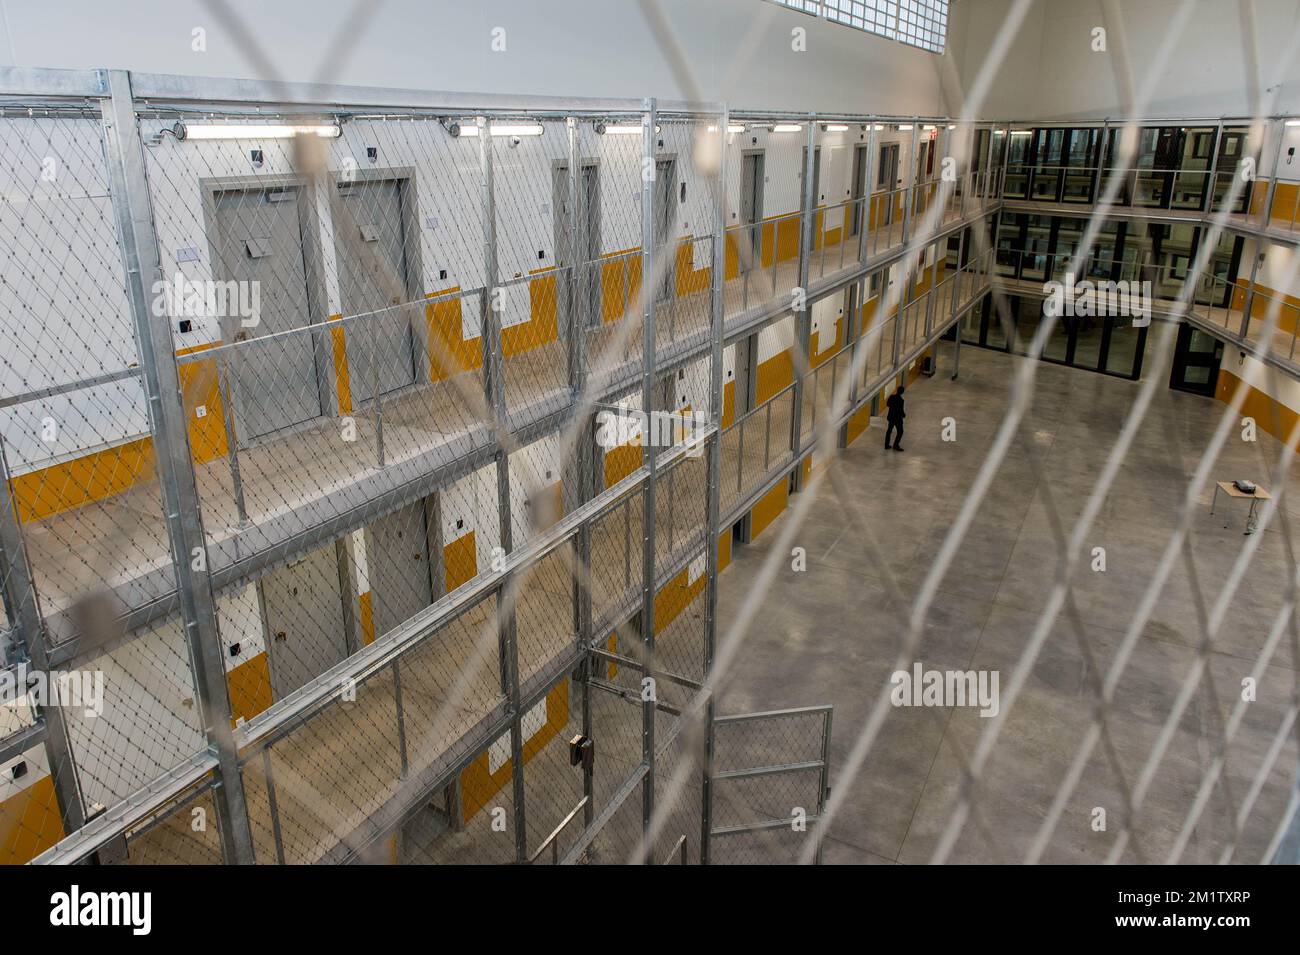 20140214 - BEVEREN-WAAS, BELGIUM: Illustration picture taken during the official opening of the new jail in Melsele, Beveren, which is one of the four new prisons planned in Belgium to enlarge the number of cells. BELGA PHOTO JONAS ROOSENS Stock Photo